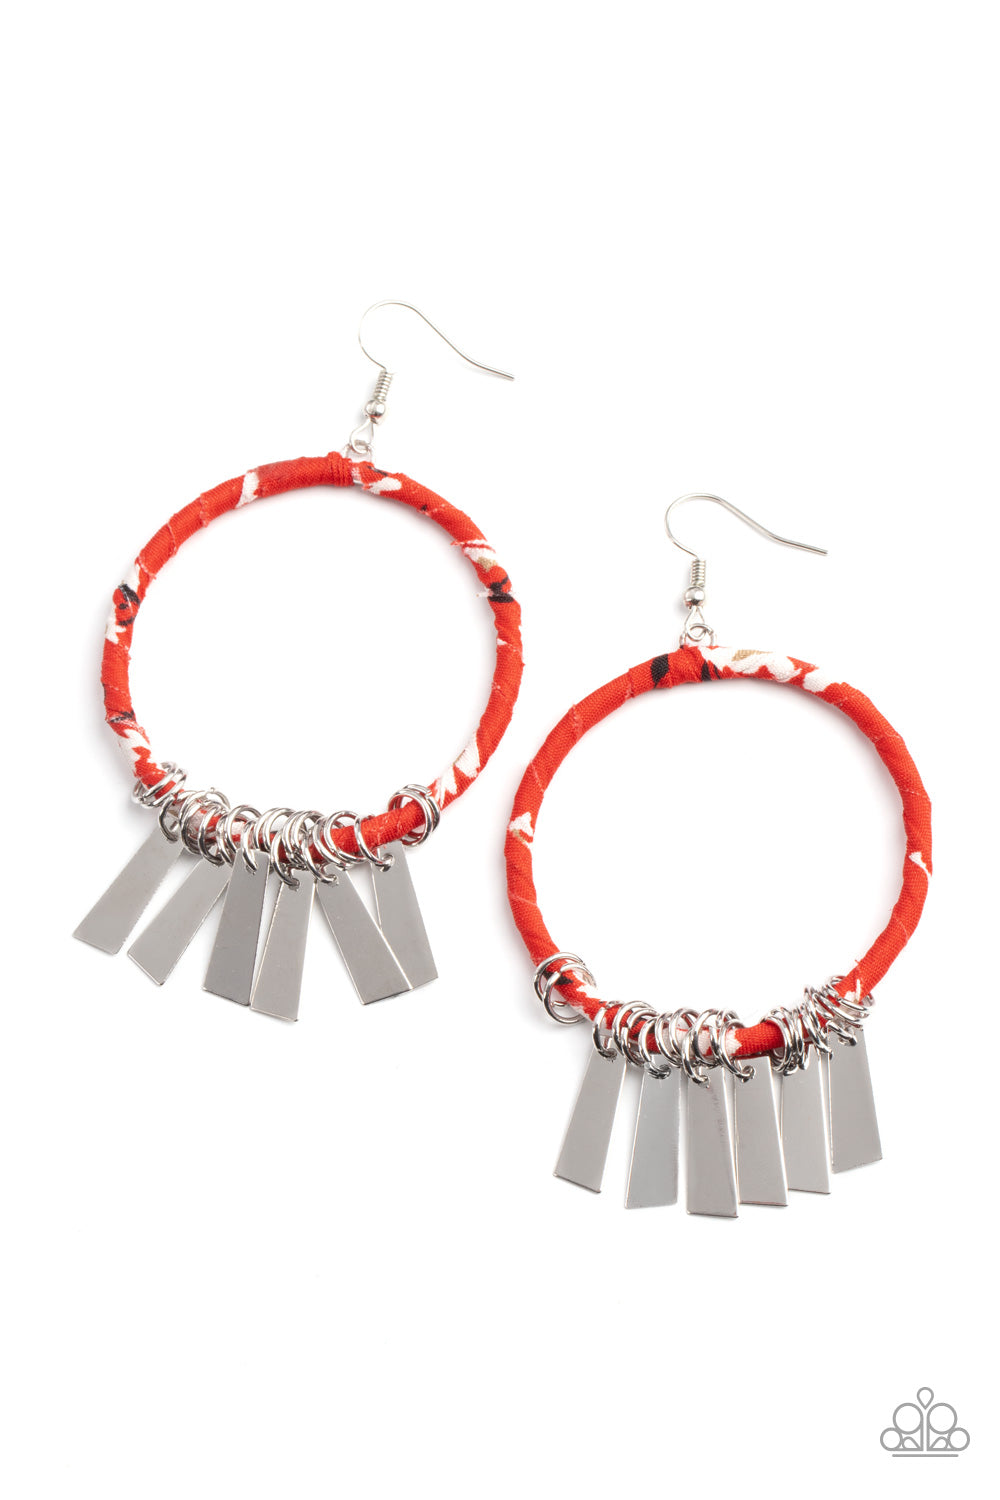 Paparazzi Accessories Garden Chimes - Red Earrings - Lady T Accessories